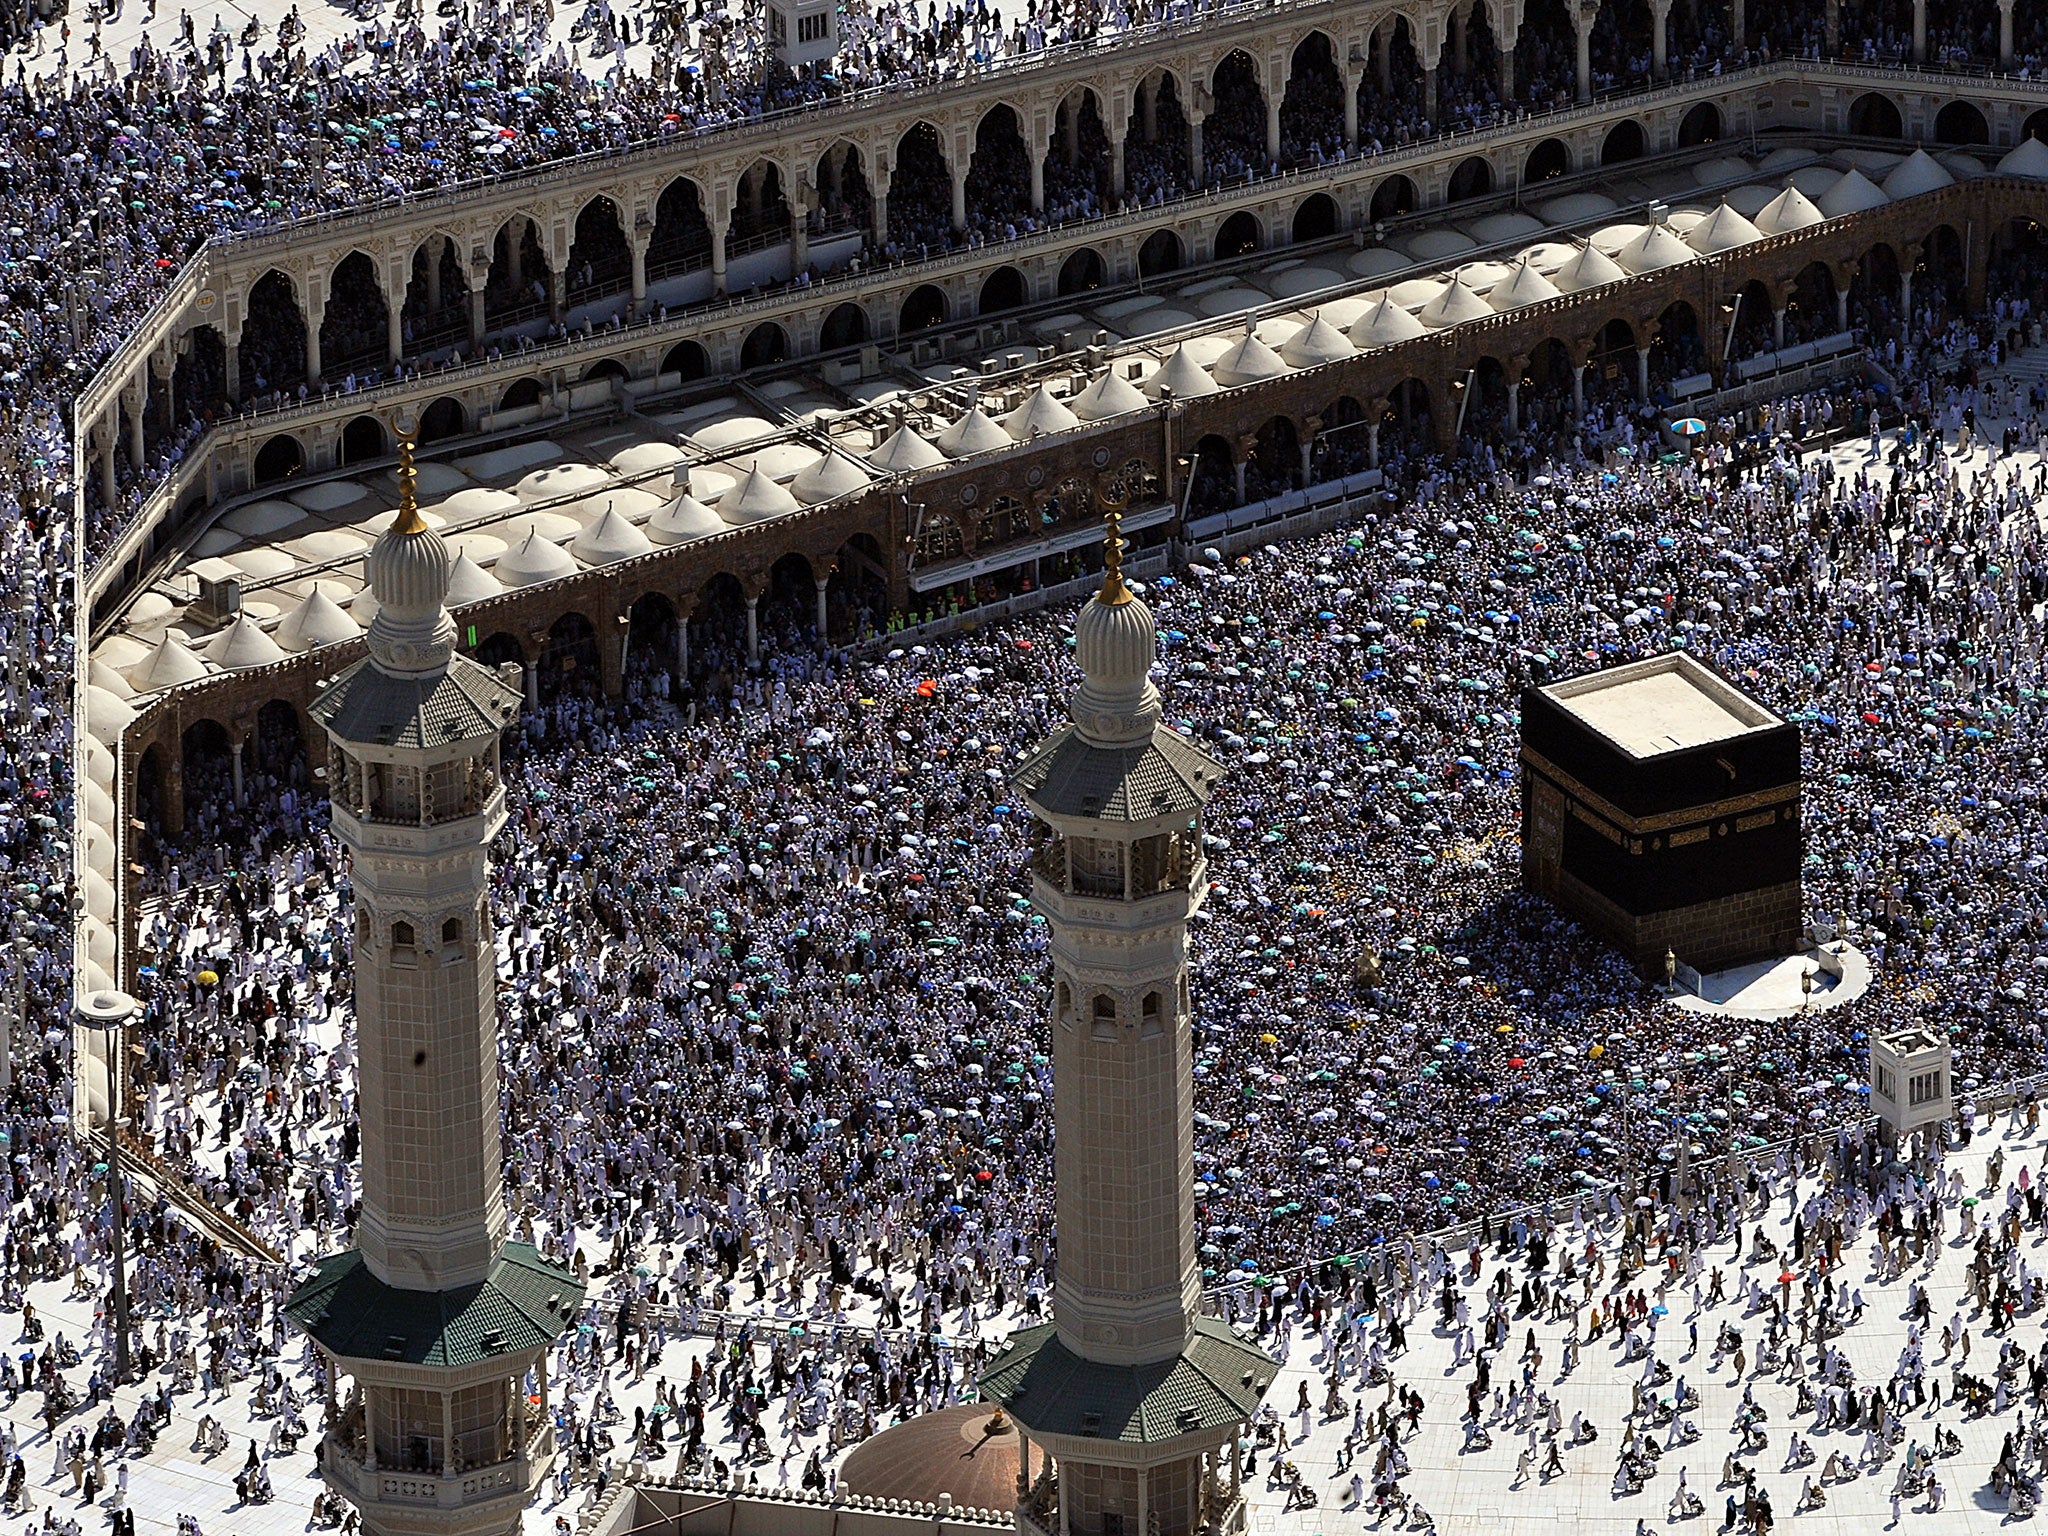 Iran has stopped citizens from travelling to Saudi Arabia for Hajj